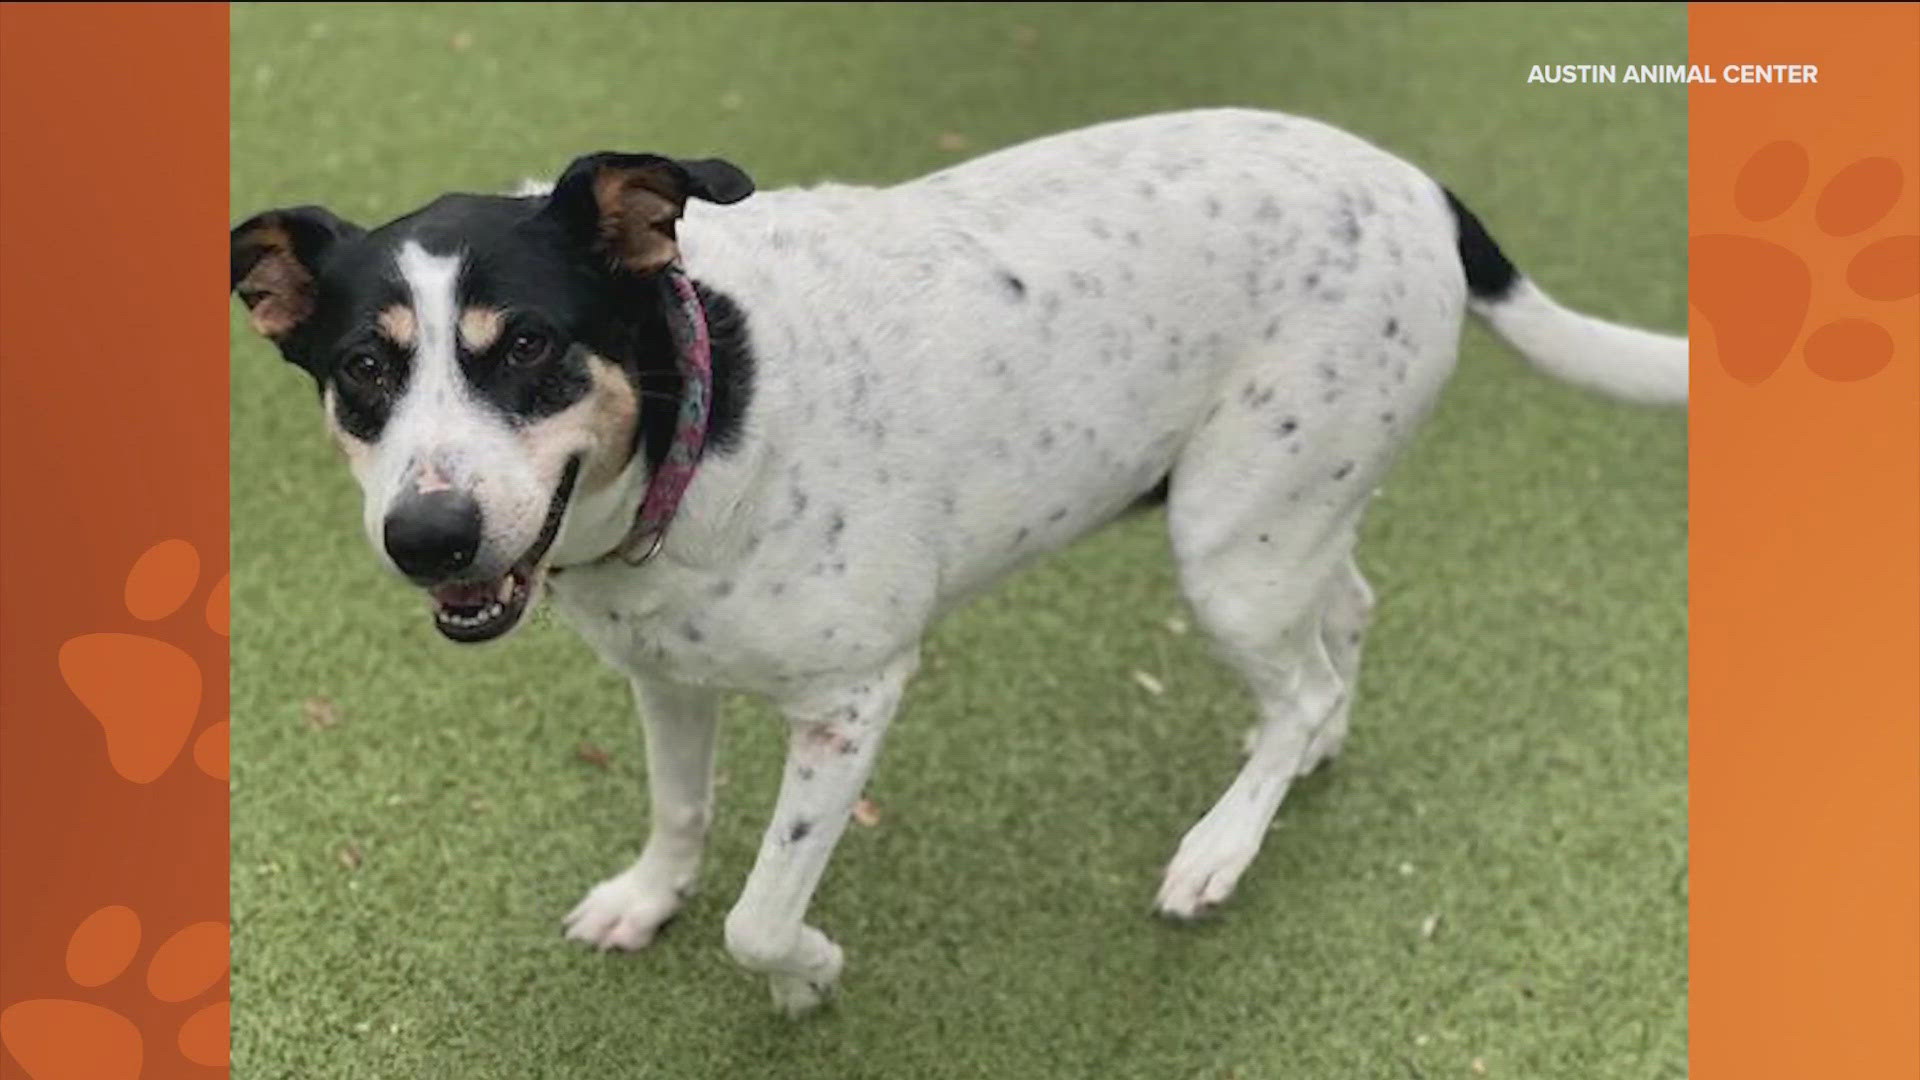 Chantelle Wallace with the Austin Animal Center said 7-year-old Maggie has "perfect manners" and gets along great with other dogs.